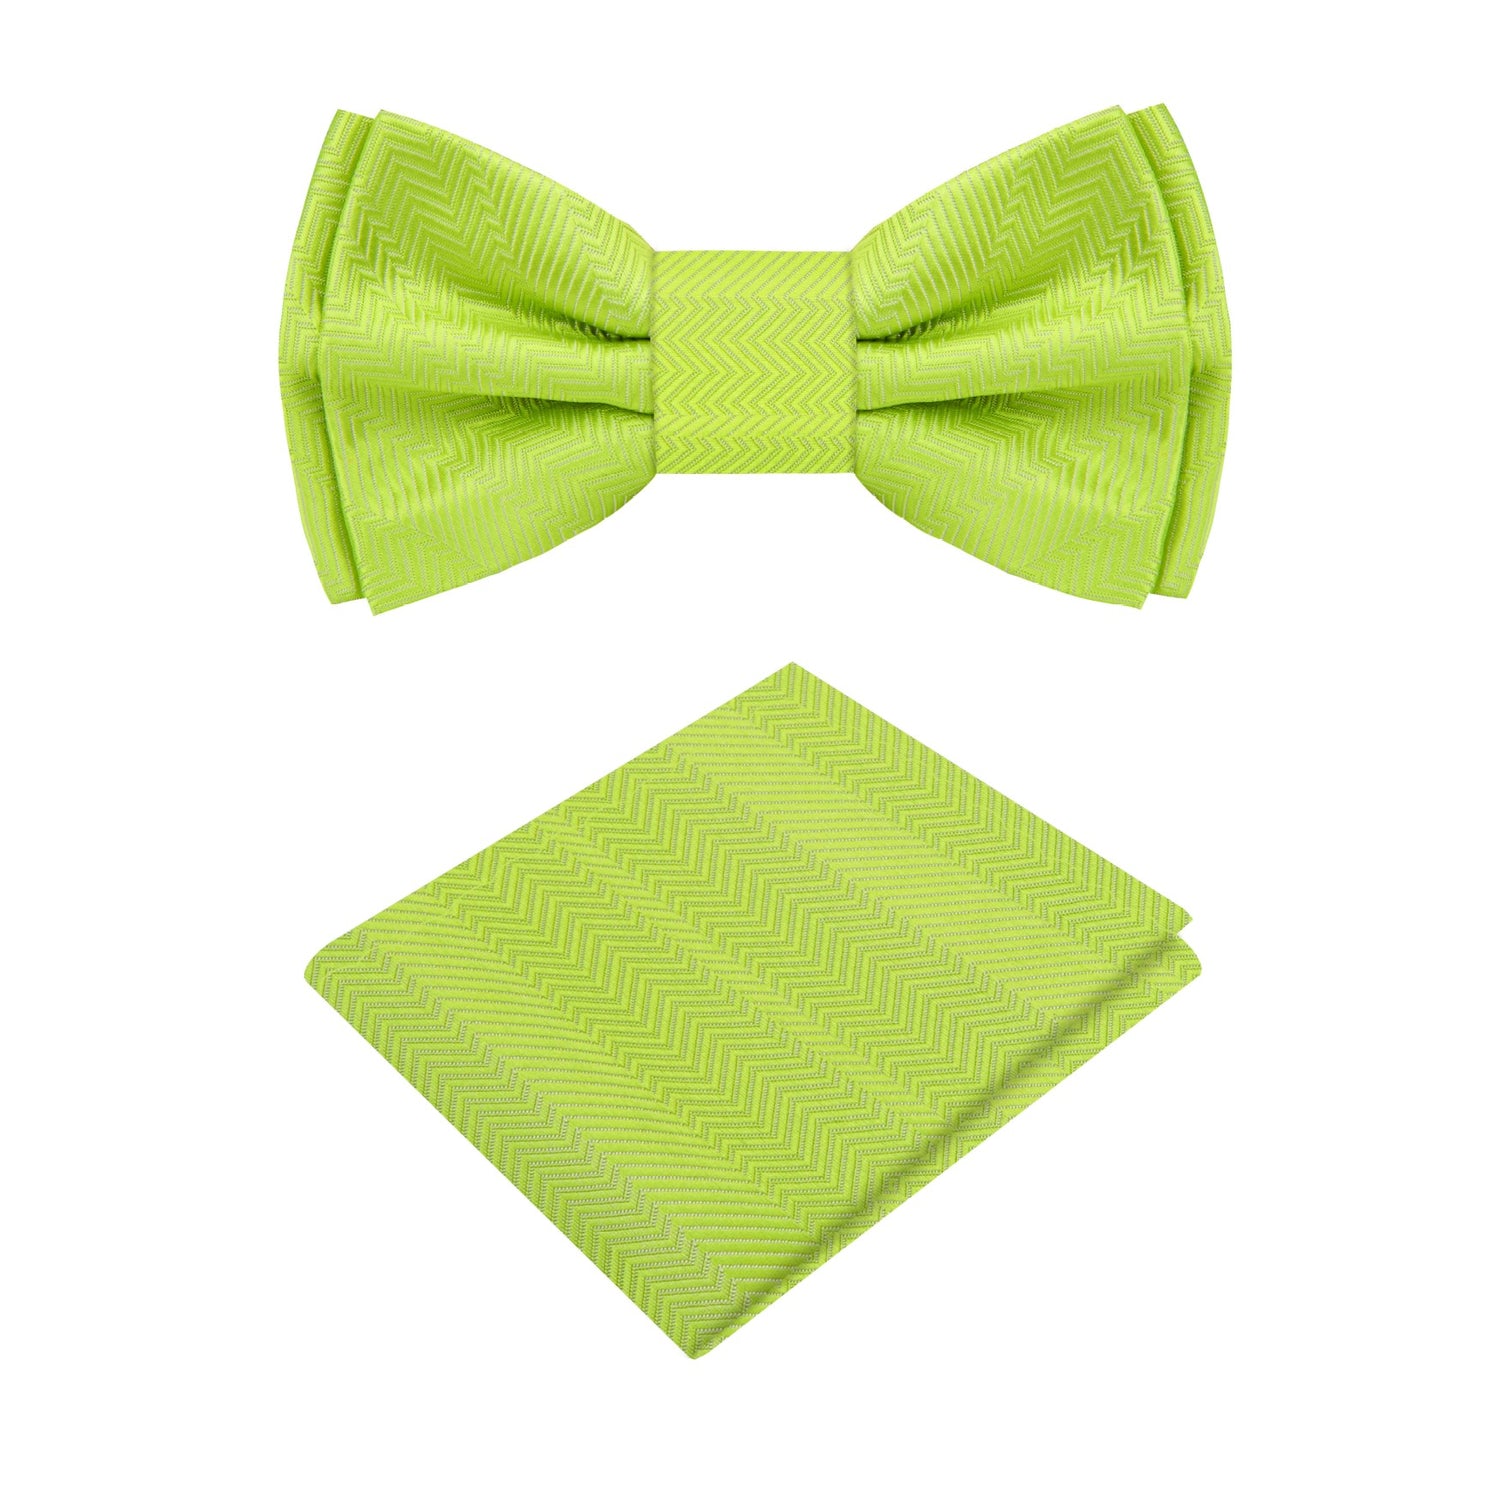 A Sweet Lime Green Pattern Silk Self Tie Bow Tie, Matching Pocket Square